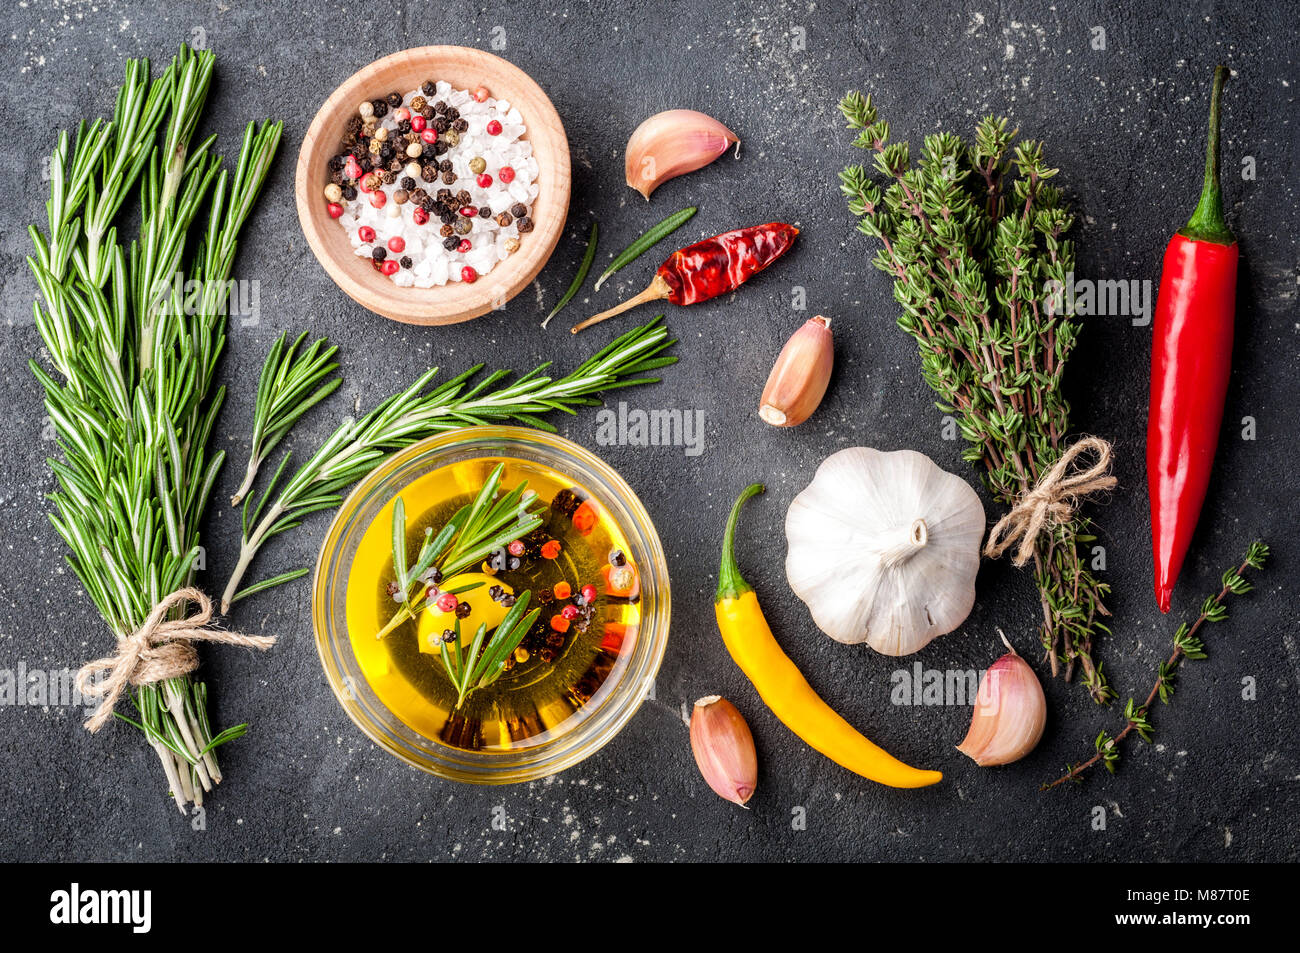 Herbs and spices. Rosemary, thyme, chili, garlic, olive oil, salt and pepper on dark table. Cooking ingredients. Top view Stock Photo